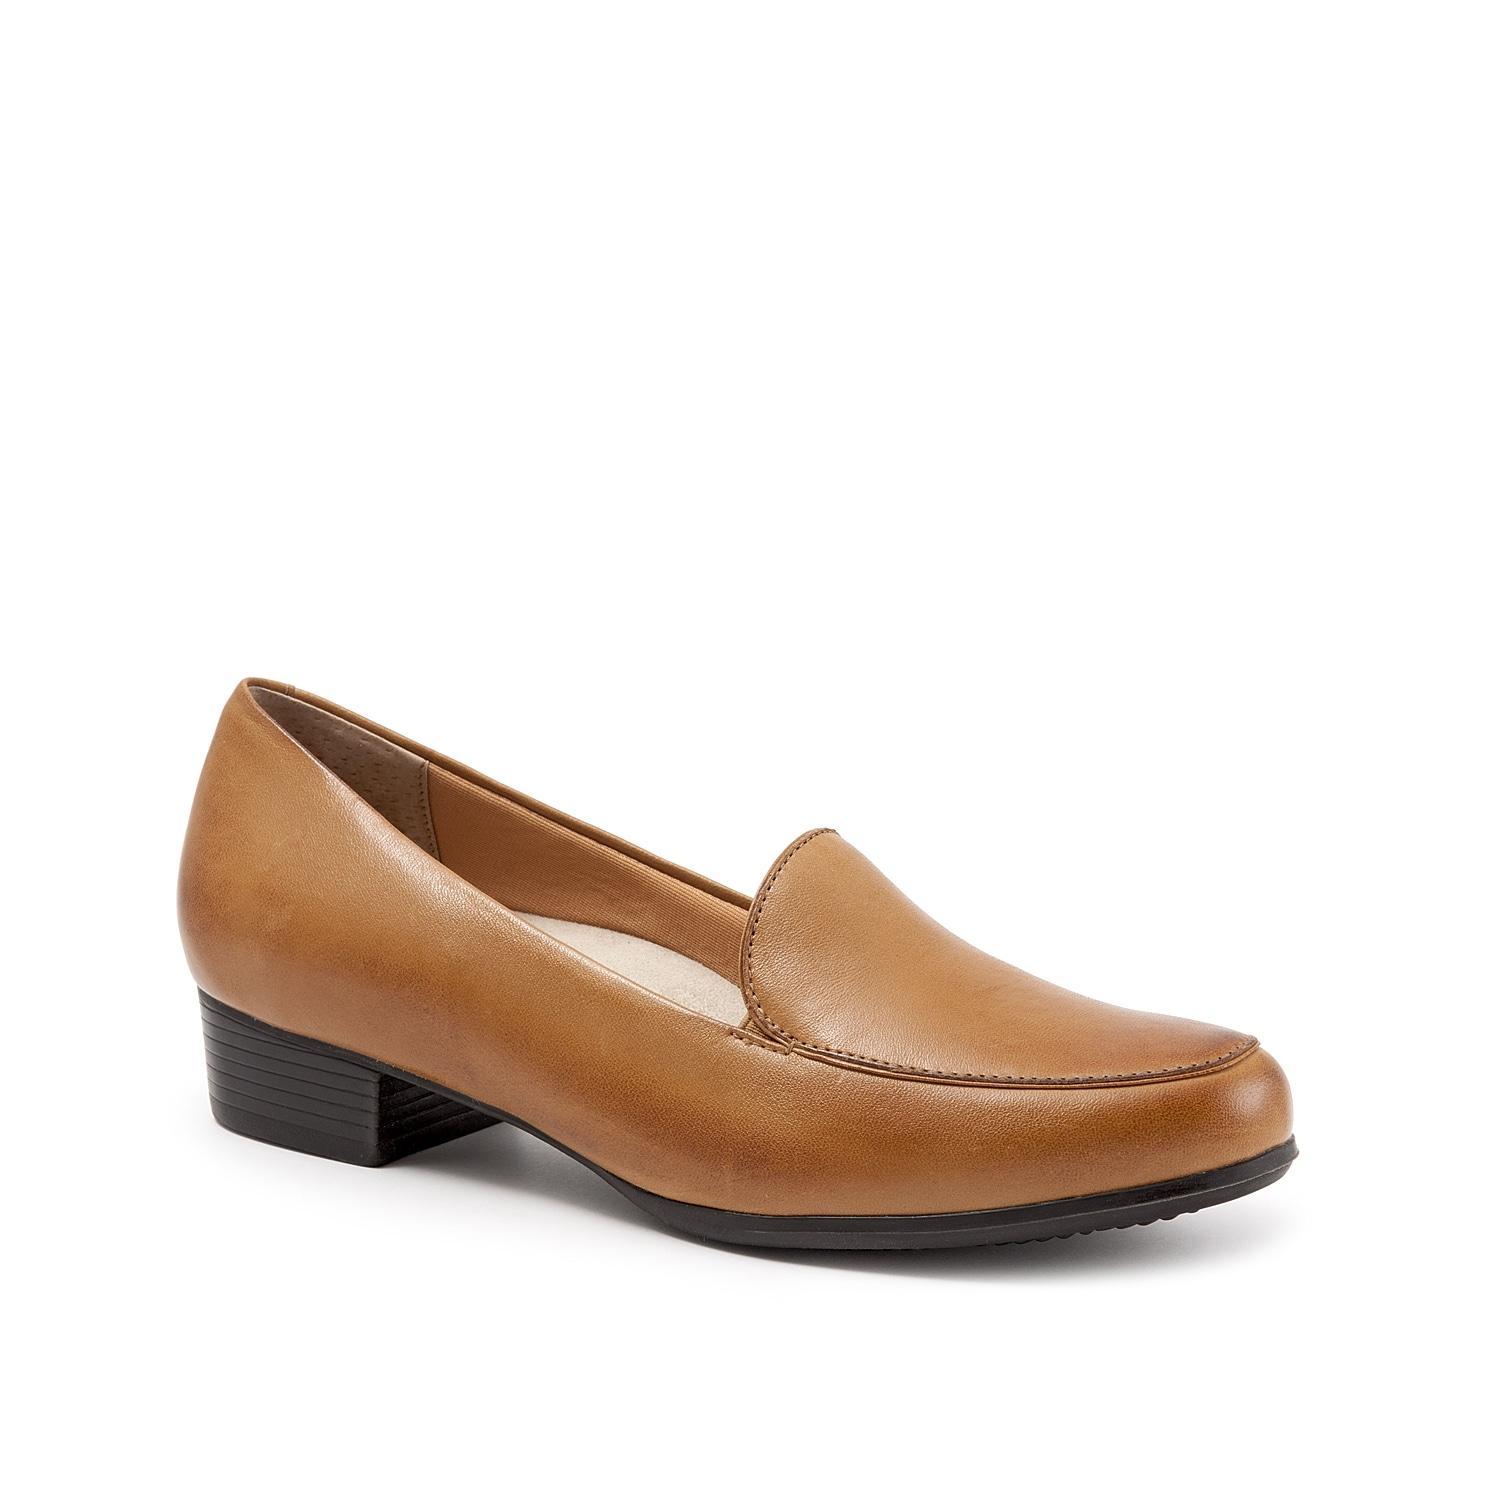 Trotters Monarch Leather Slip-On Block Heel Loafers Product Image